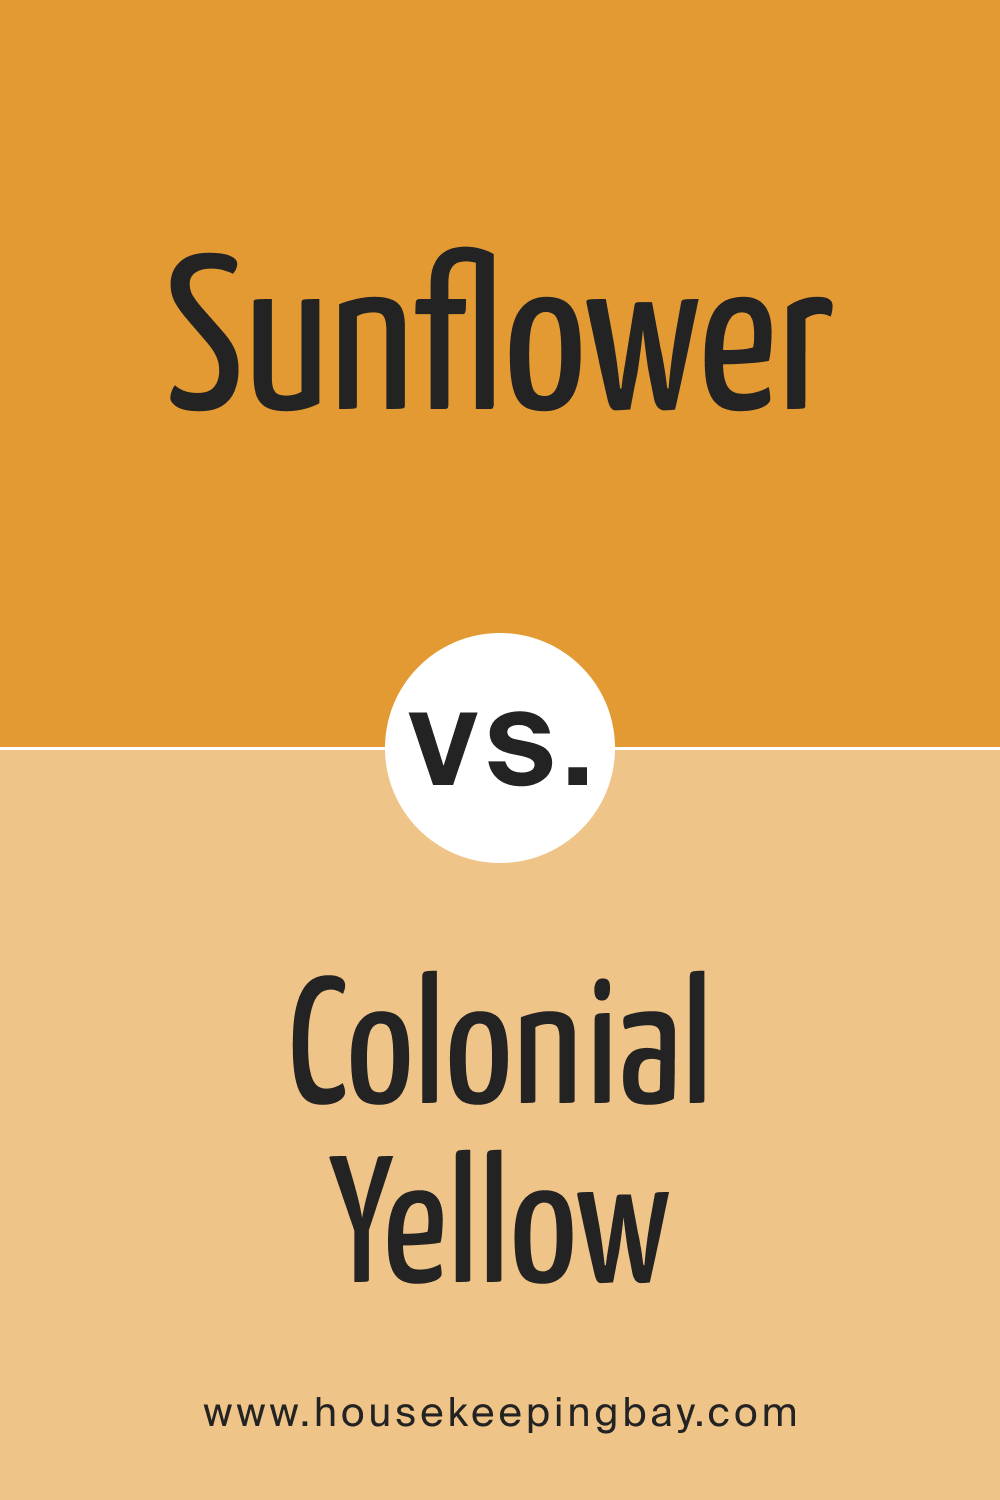 Sunflower SW 6678 vs SW 0030 Colonial Yellow